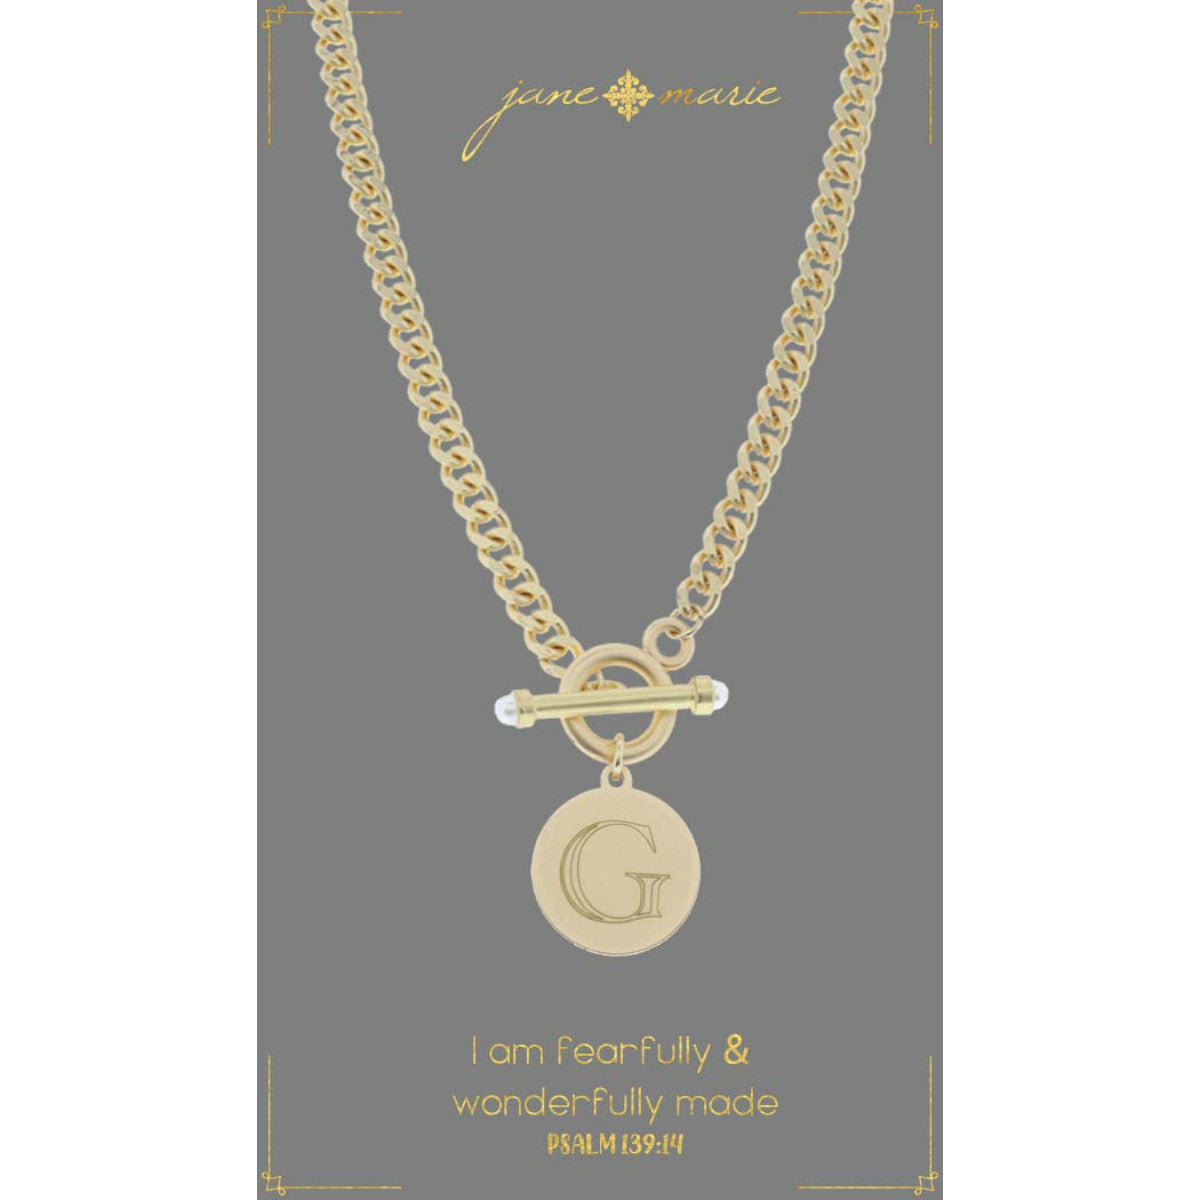 "g" stamped letter necklace on a gray display card on a white background